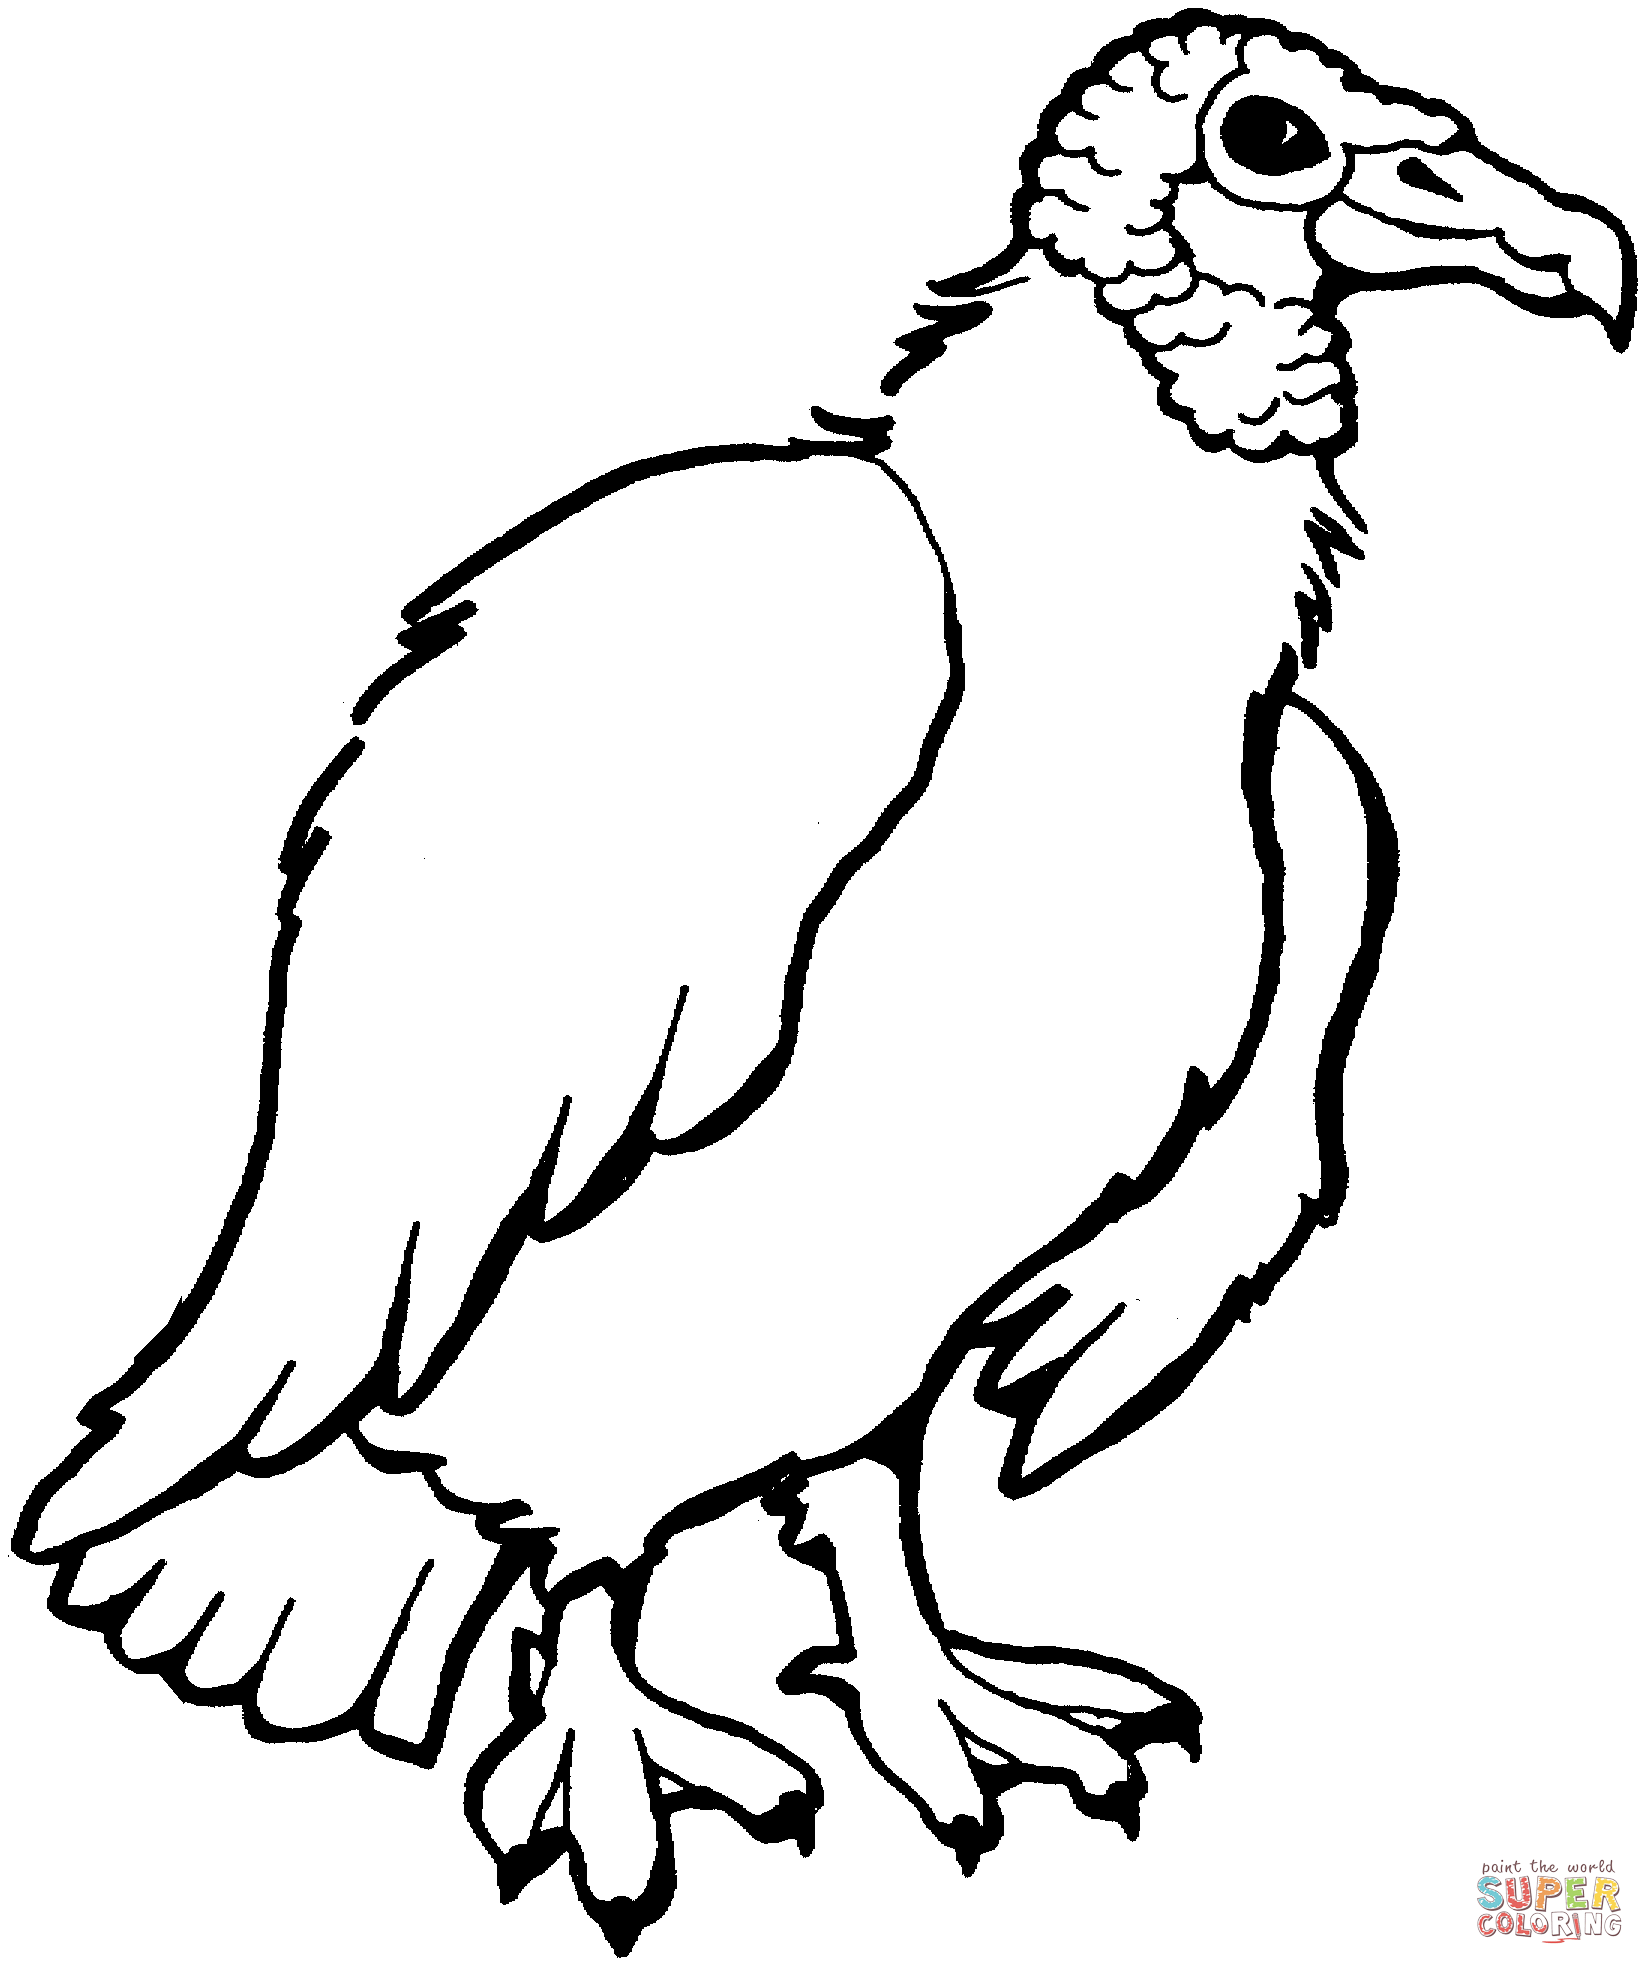 Turkey Vulture clipart #10, Download drawings